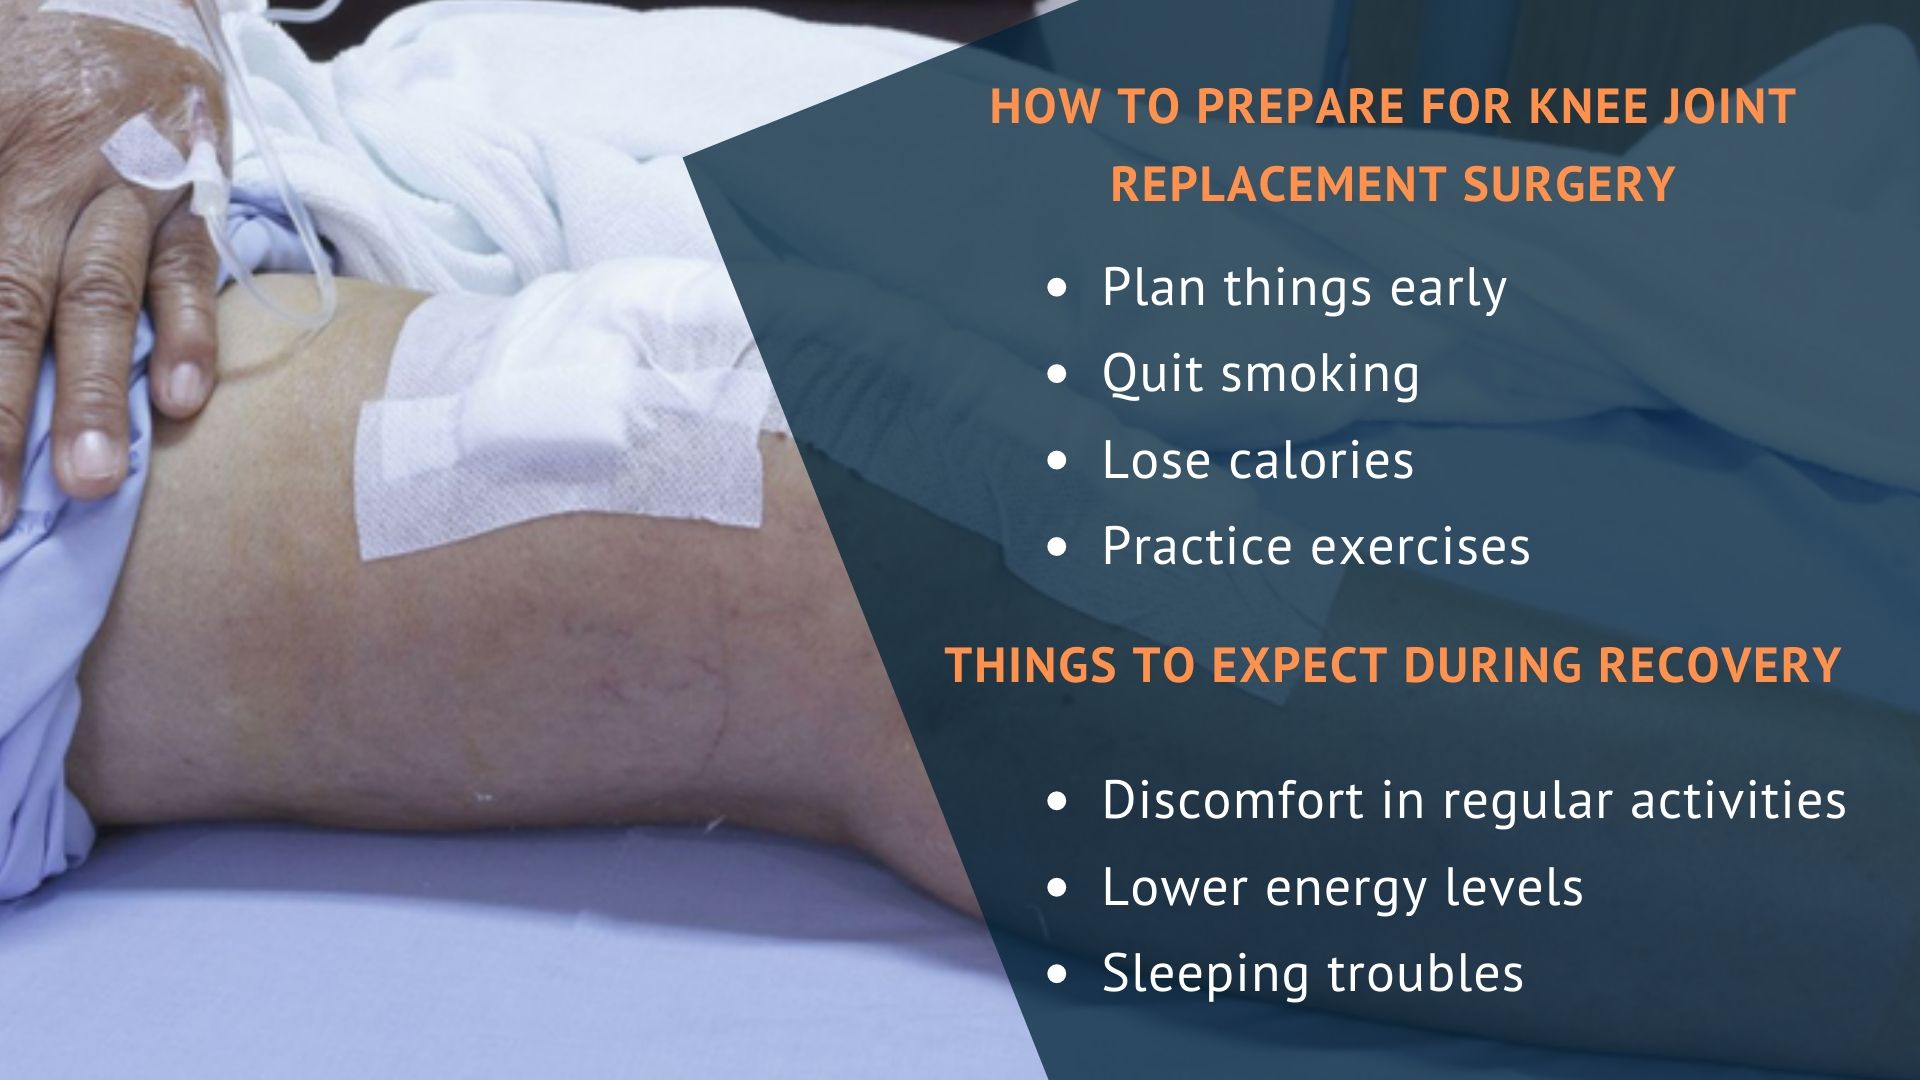 How to prepare for knee joint replacement surgery and what to expect during recovery?